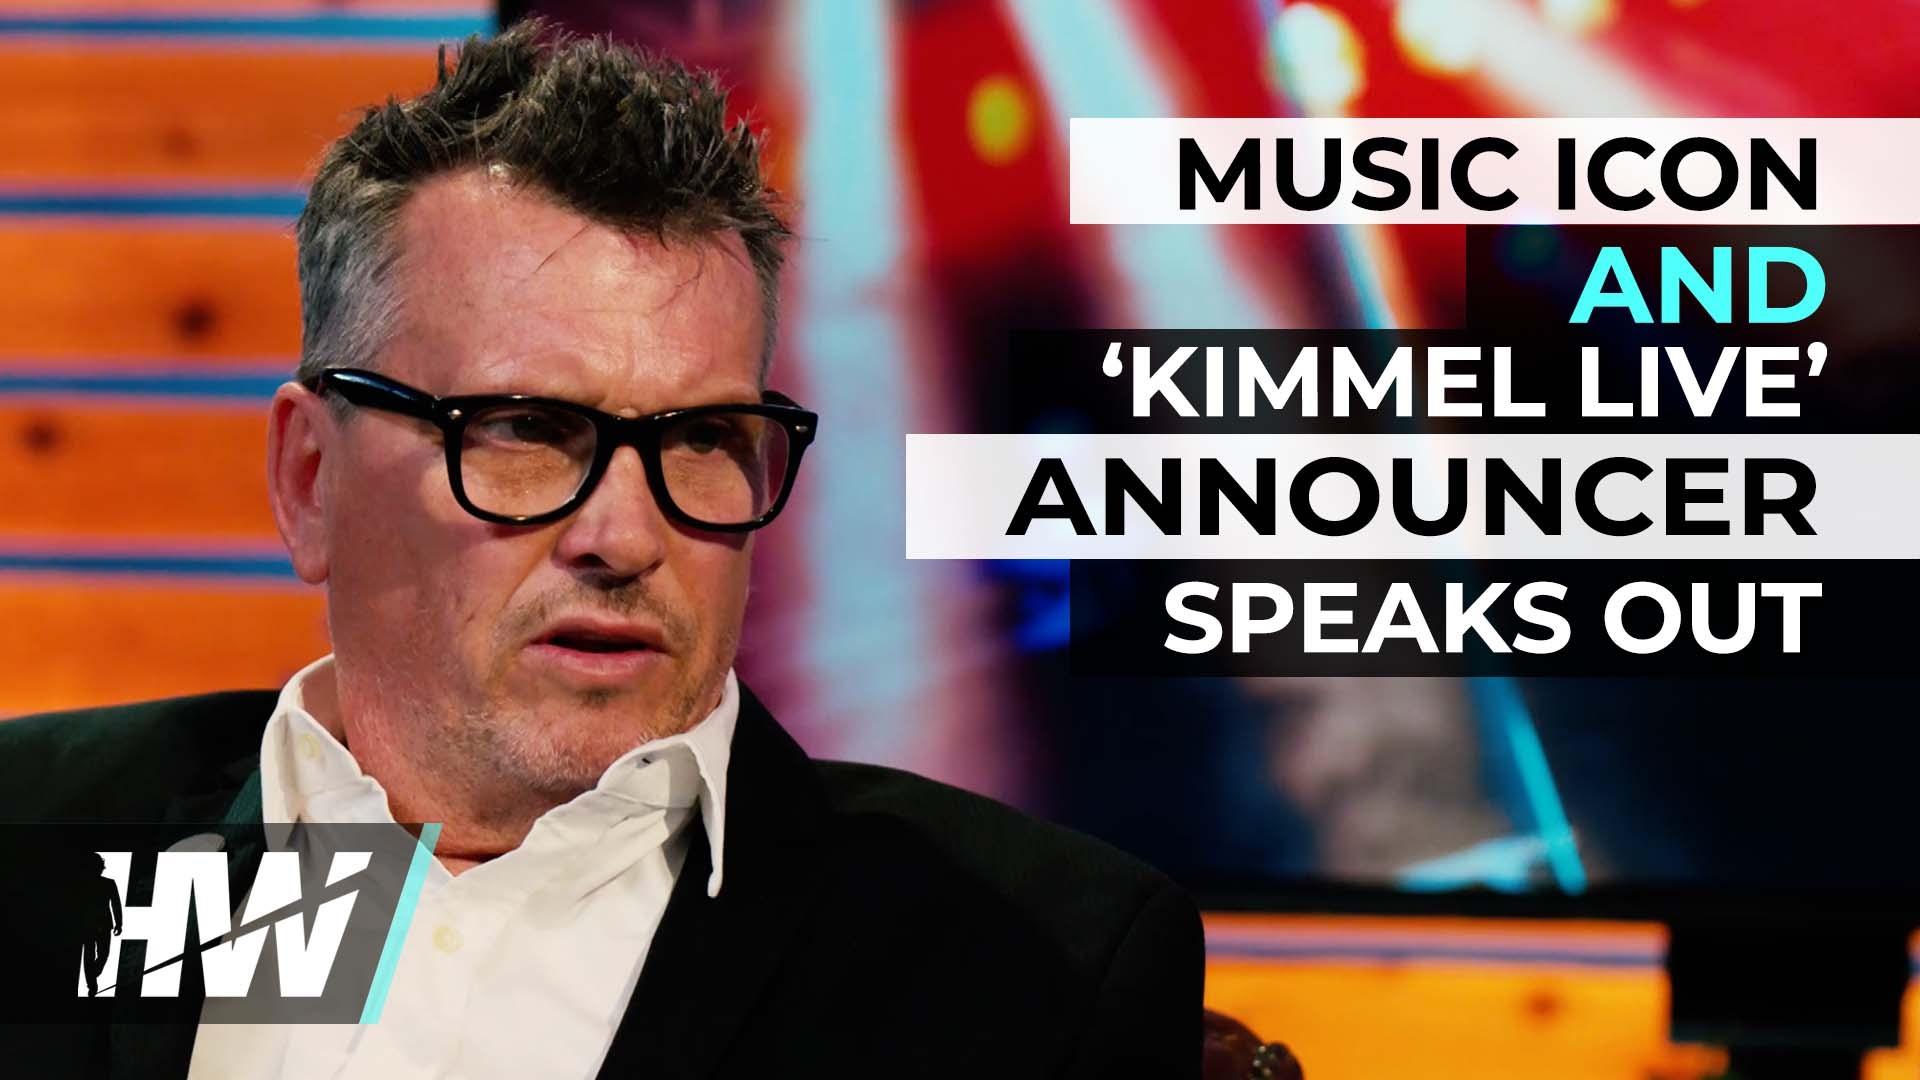 MUSIC ICON AND 'KIMMEL LIVE' ANNOUNCER SPEAKS OUT